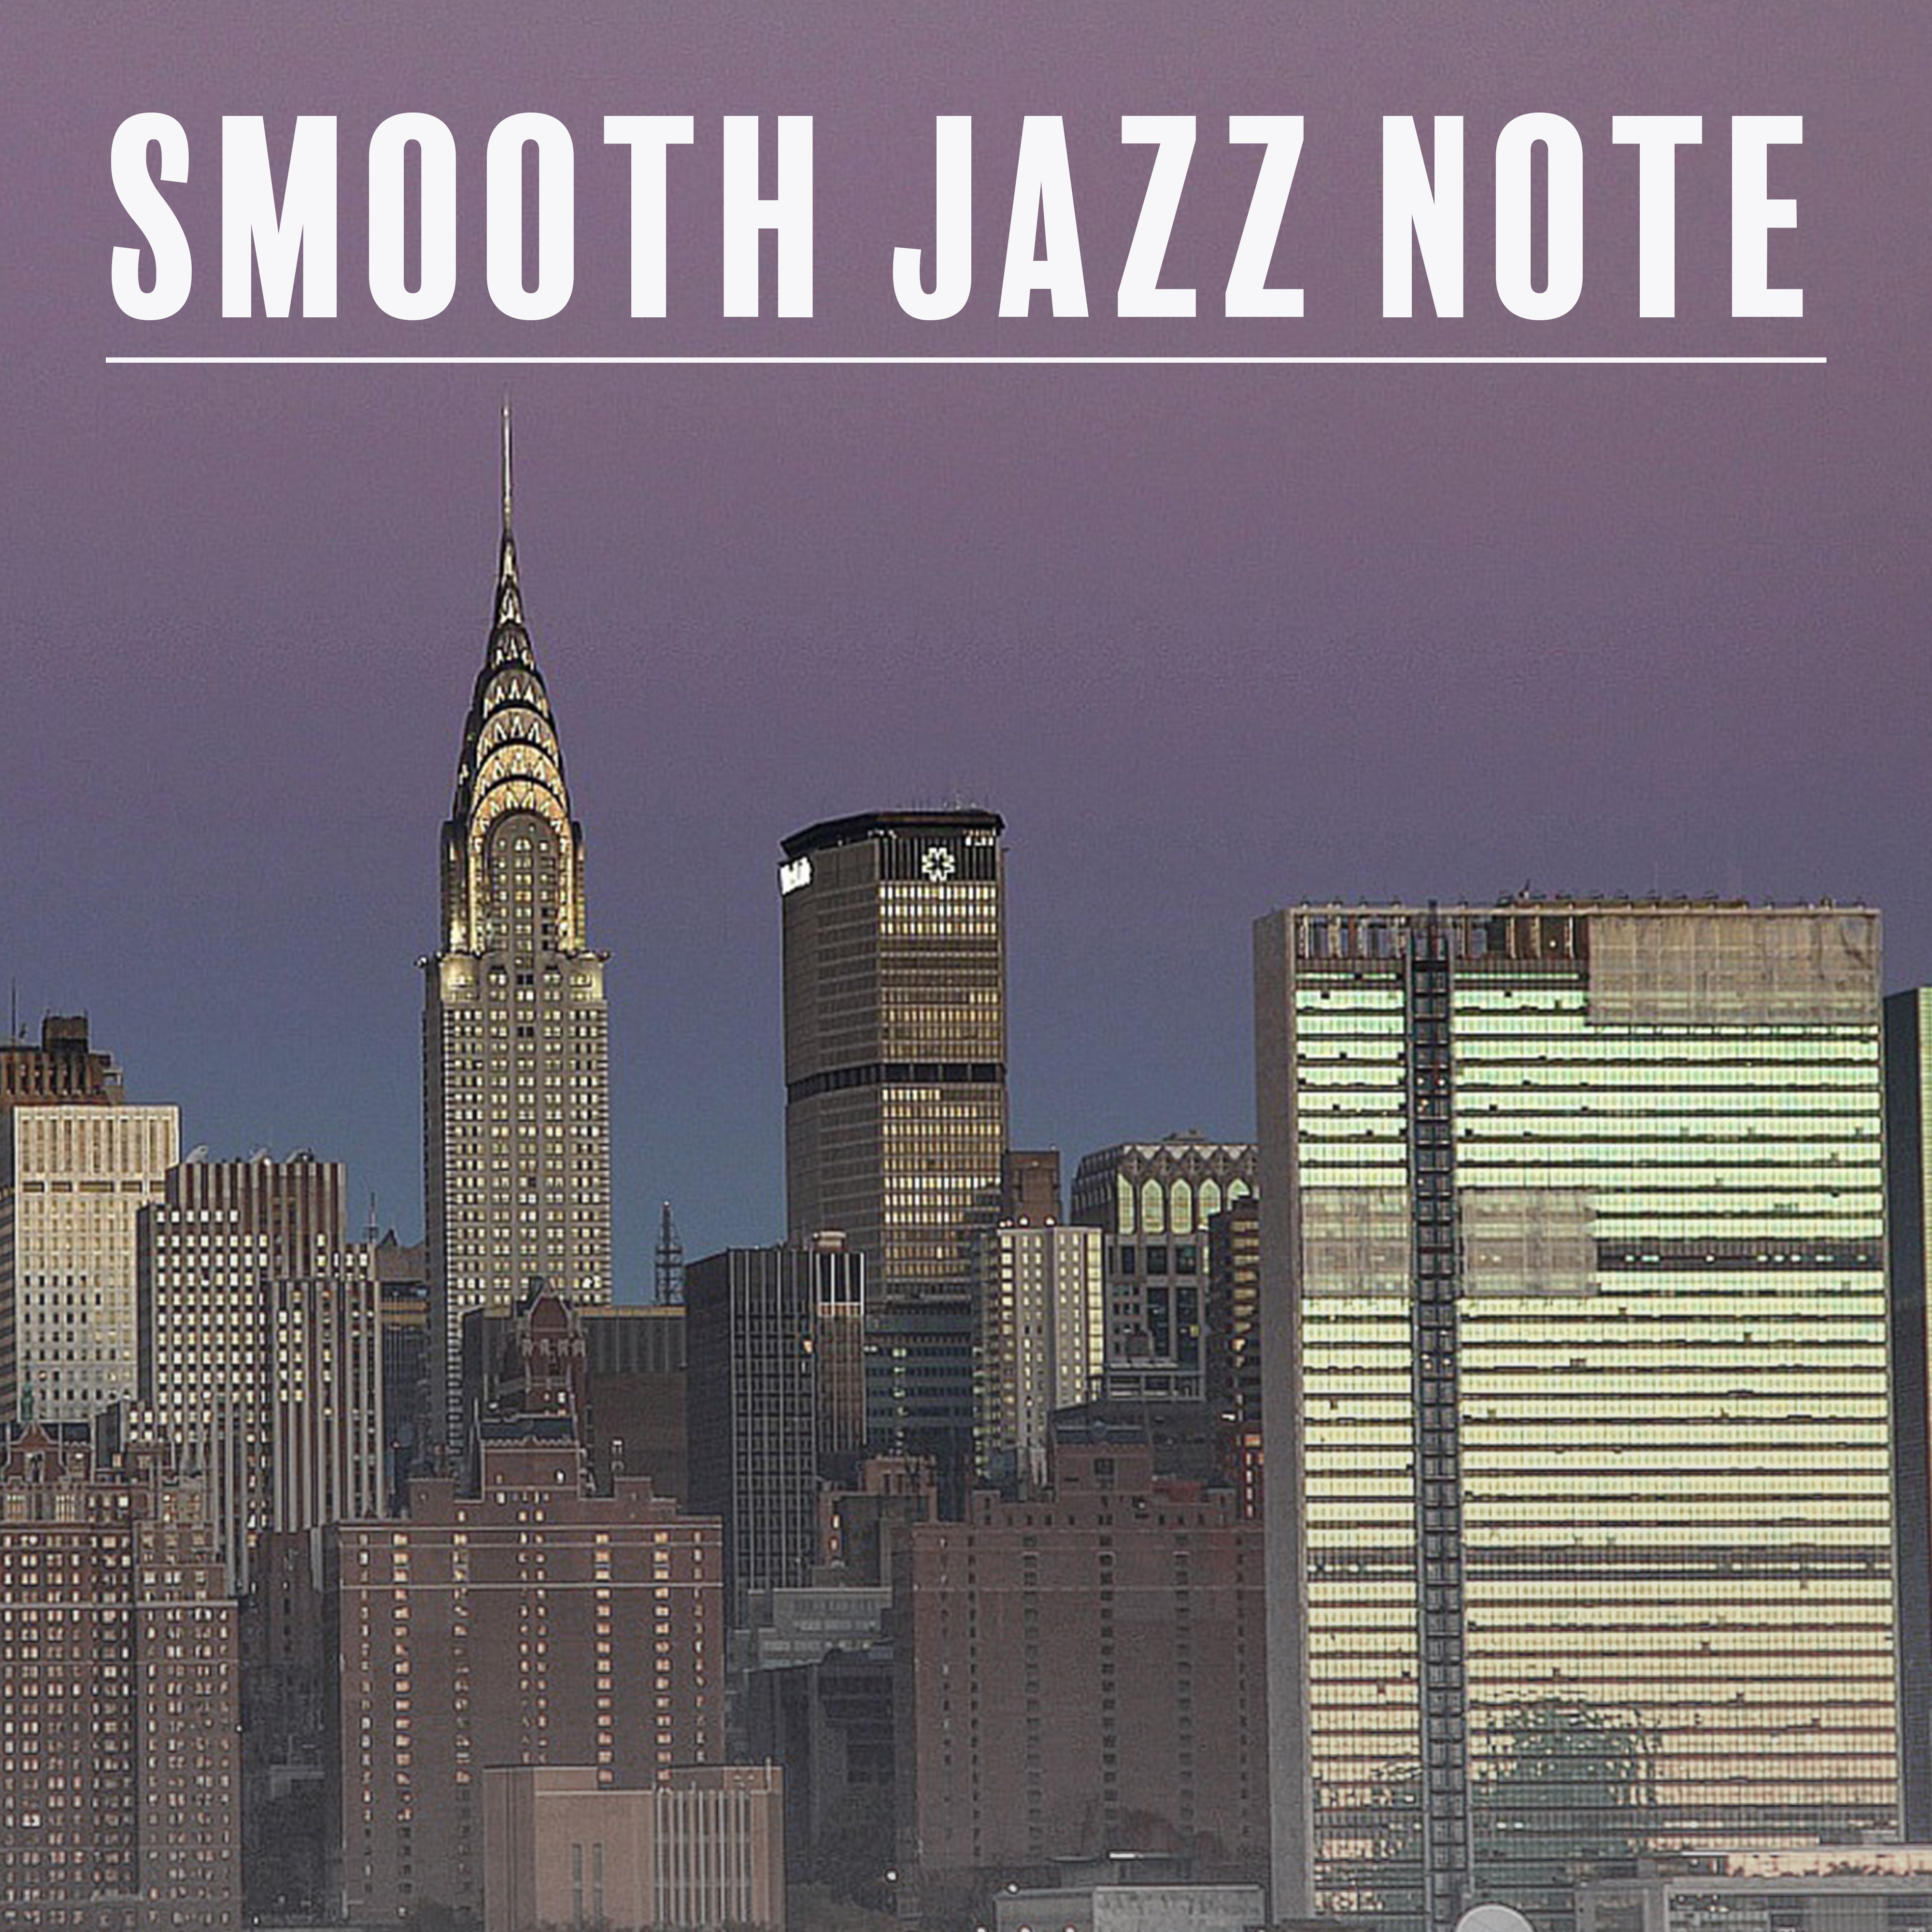 Smooth Jazz Note – Easy Listening Instrumental Music, Mellow Jazz, Peaceful Piano, Relaxed Jazz